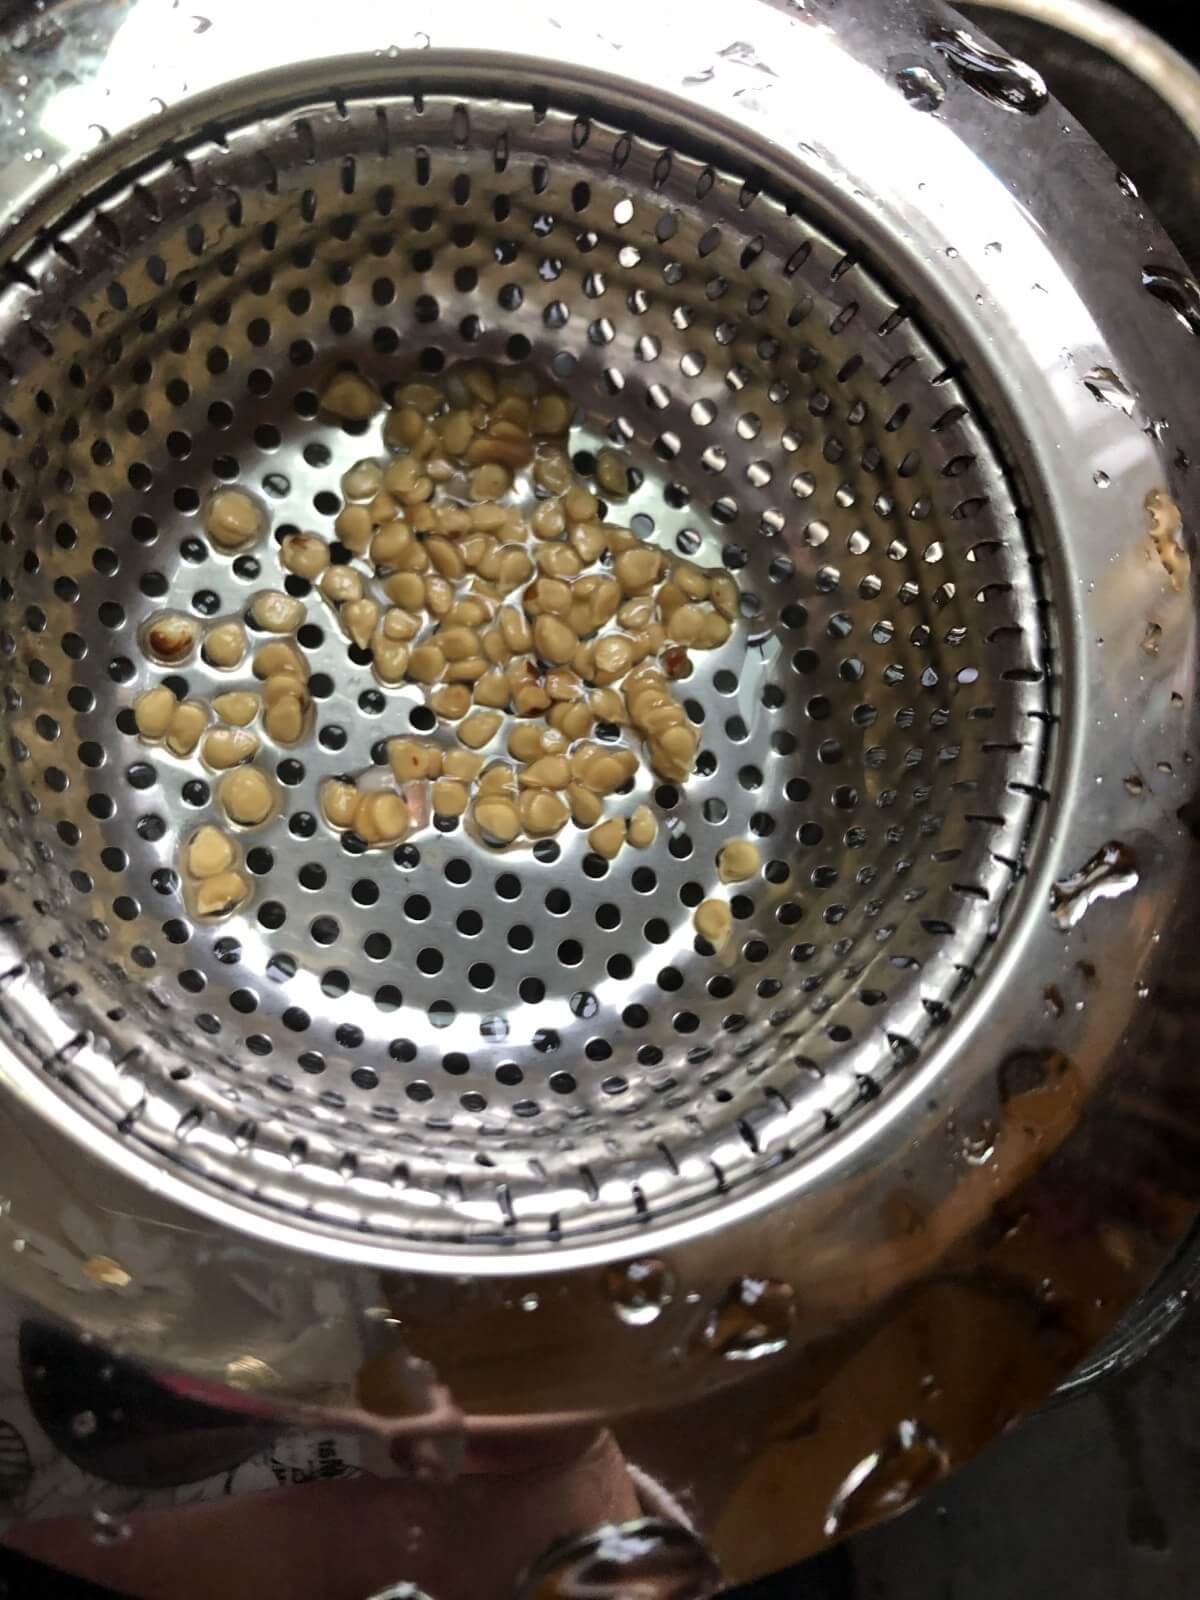 tomato seeds in small sink strainer ready for drying